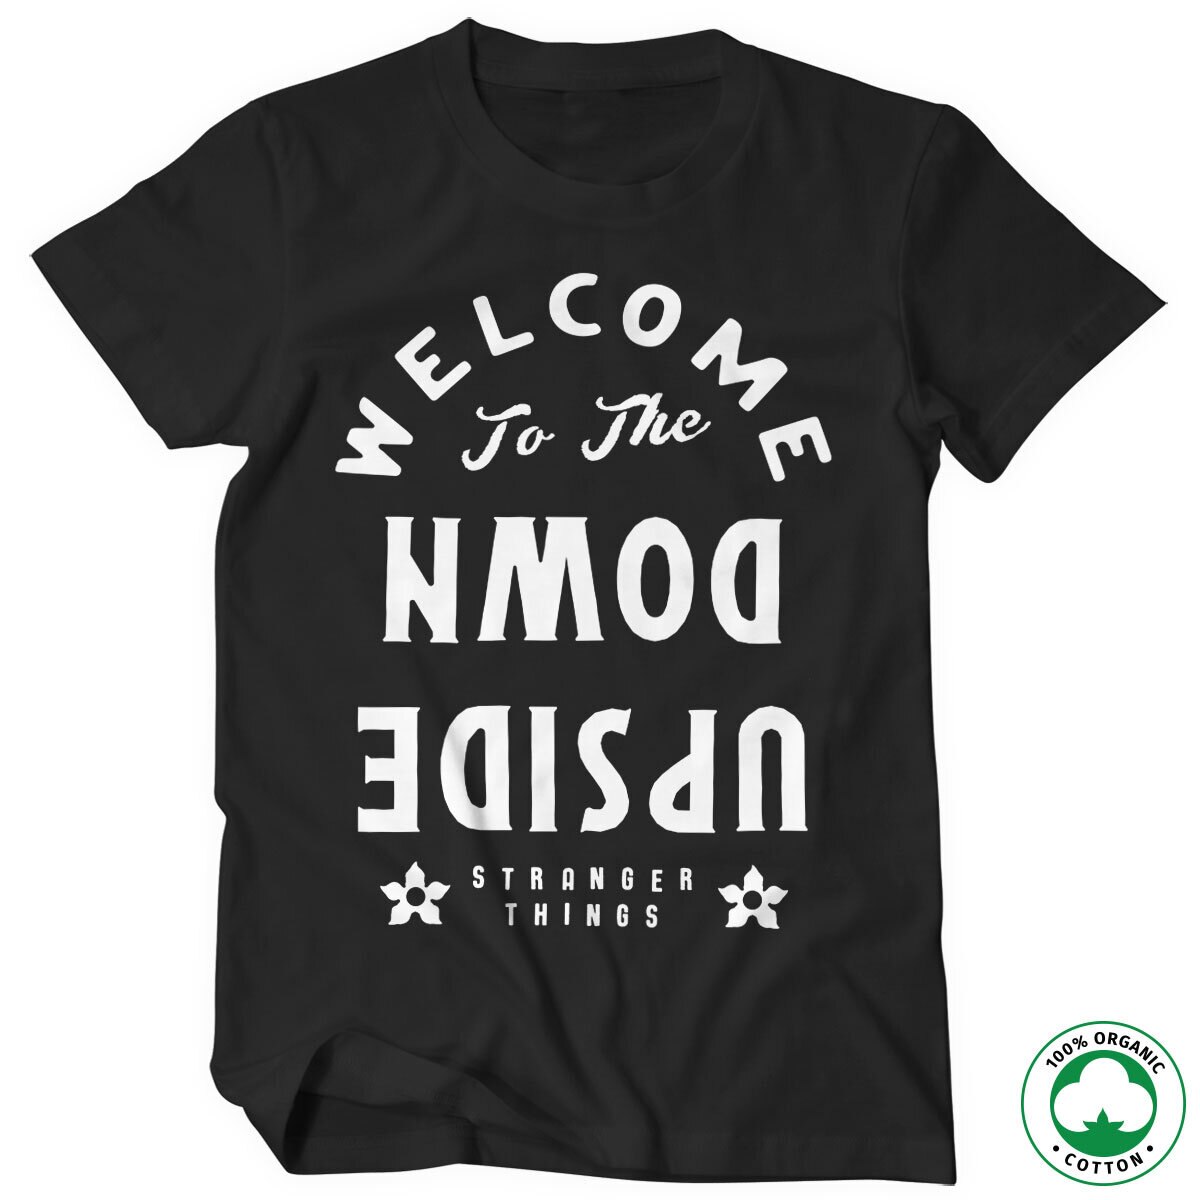 Welcome To The Upside Down Organic T-Shirt